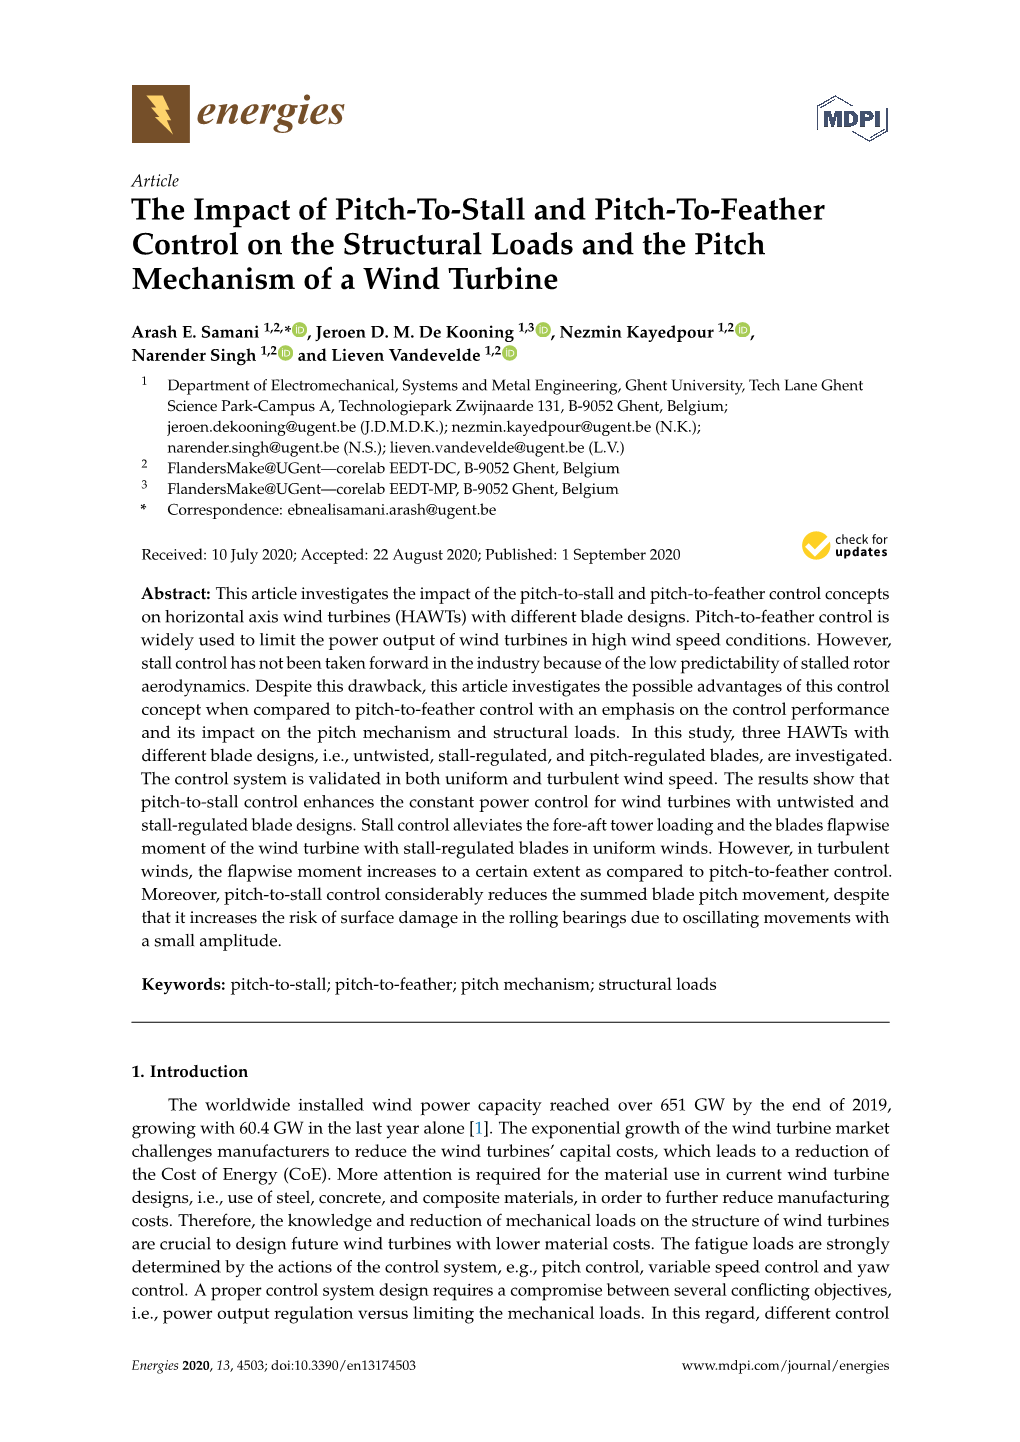 The Impact of Pitch-To-Stall and Pitch-To-Feather Control on the Structural Loads and the Pitch Mechanism of a Wind Turbine